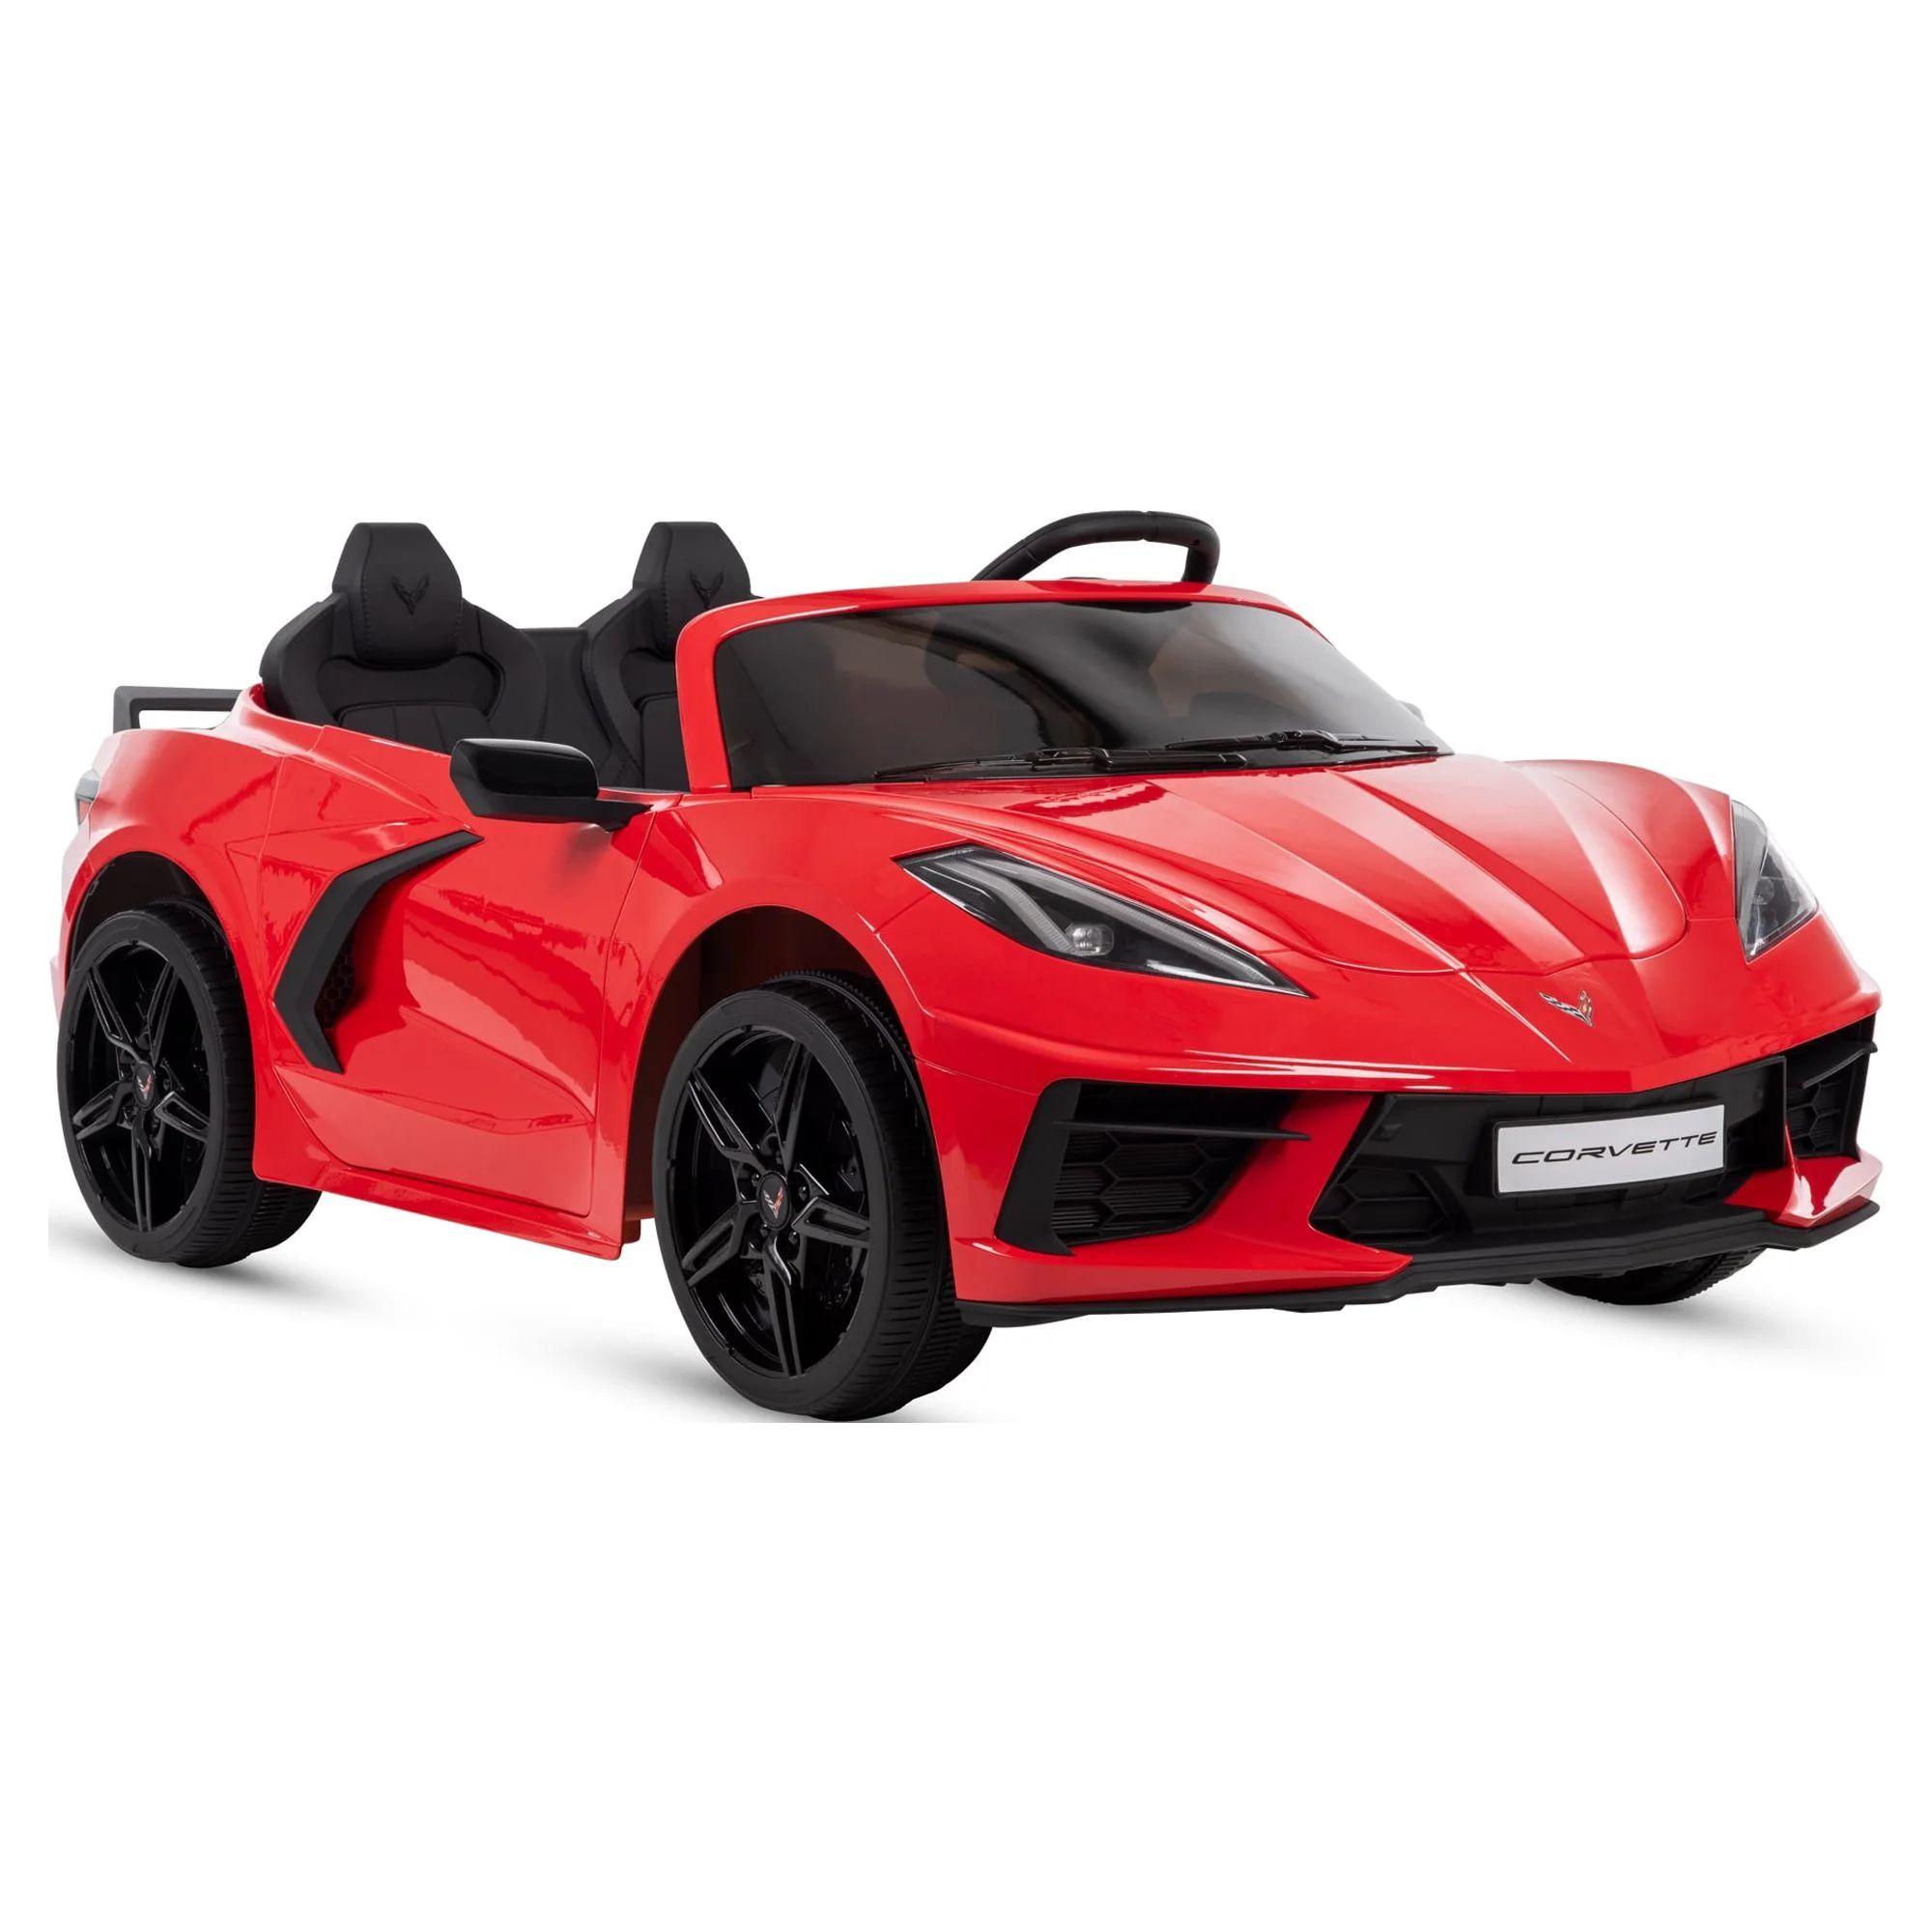 Corvette Stingray 12 Volt Ride-in Car Toy, for Children Ages 3+ Years, Red, by Huffy | Walmart (US)